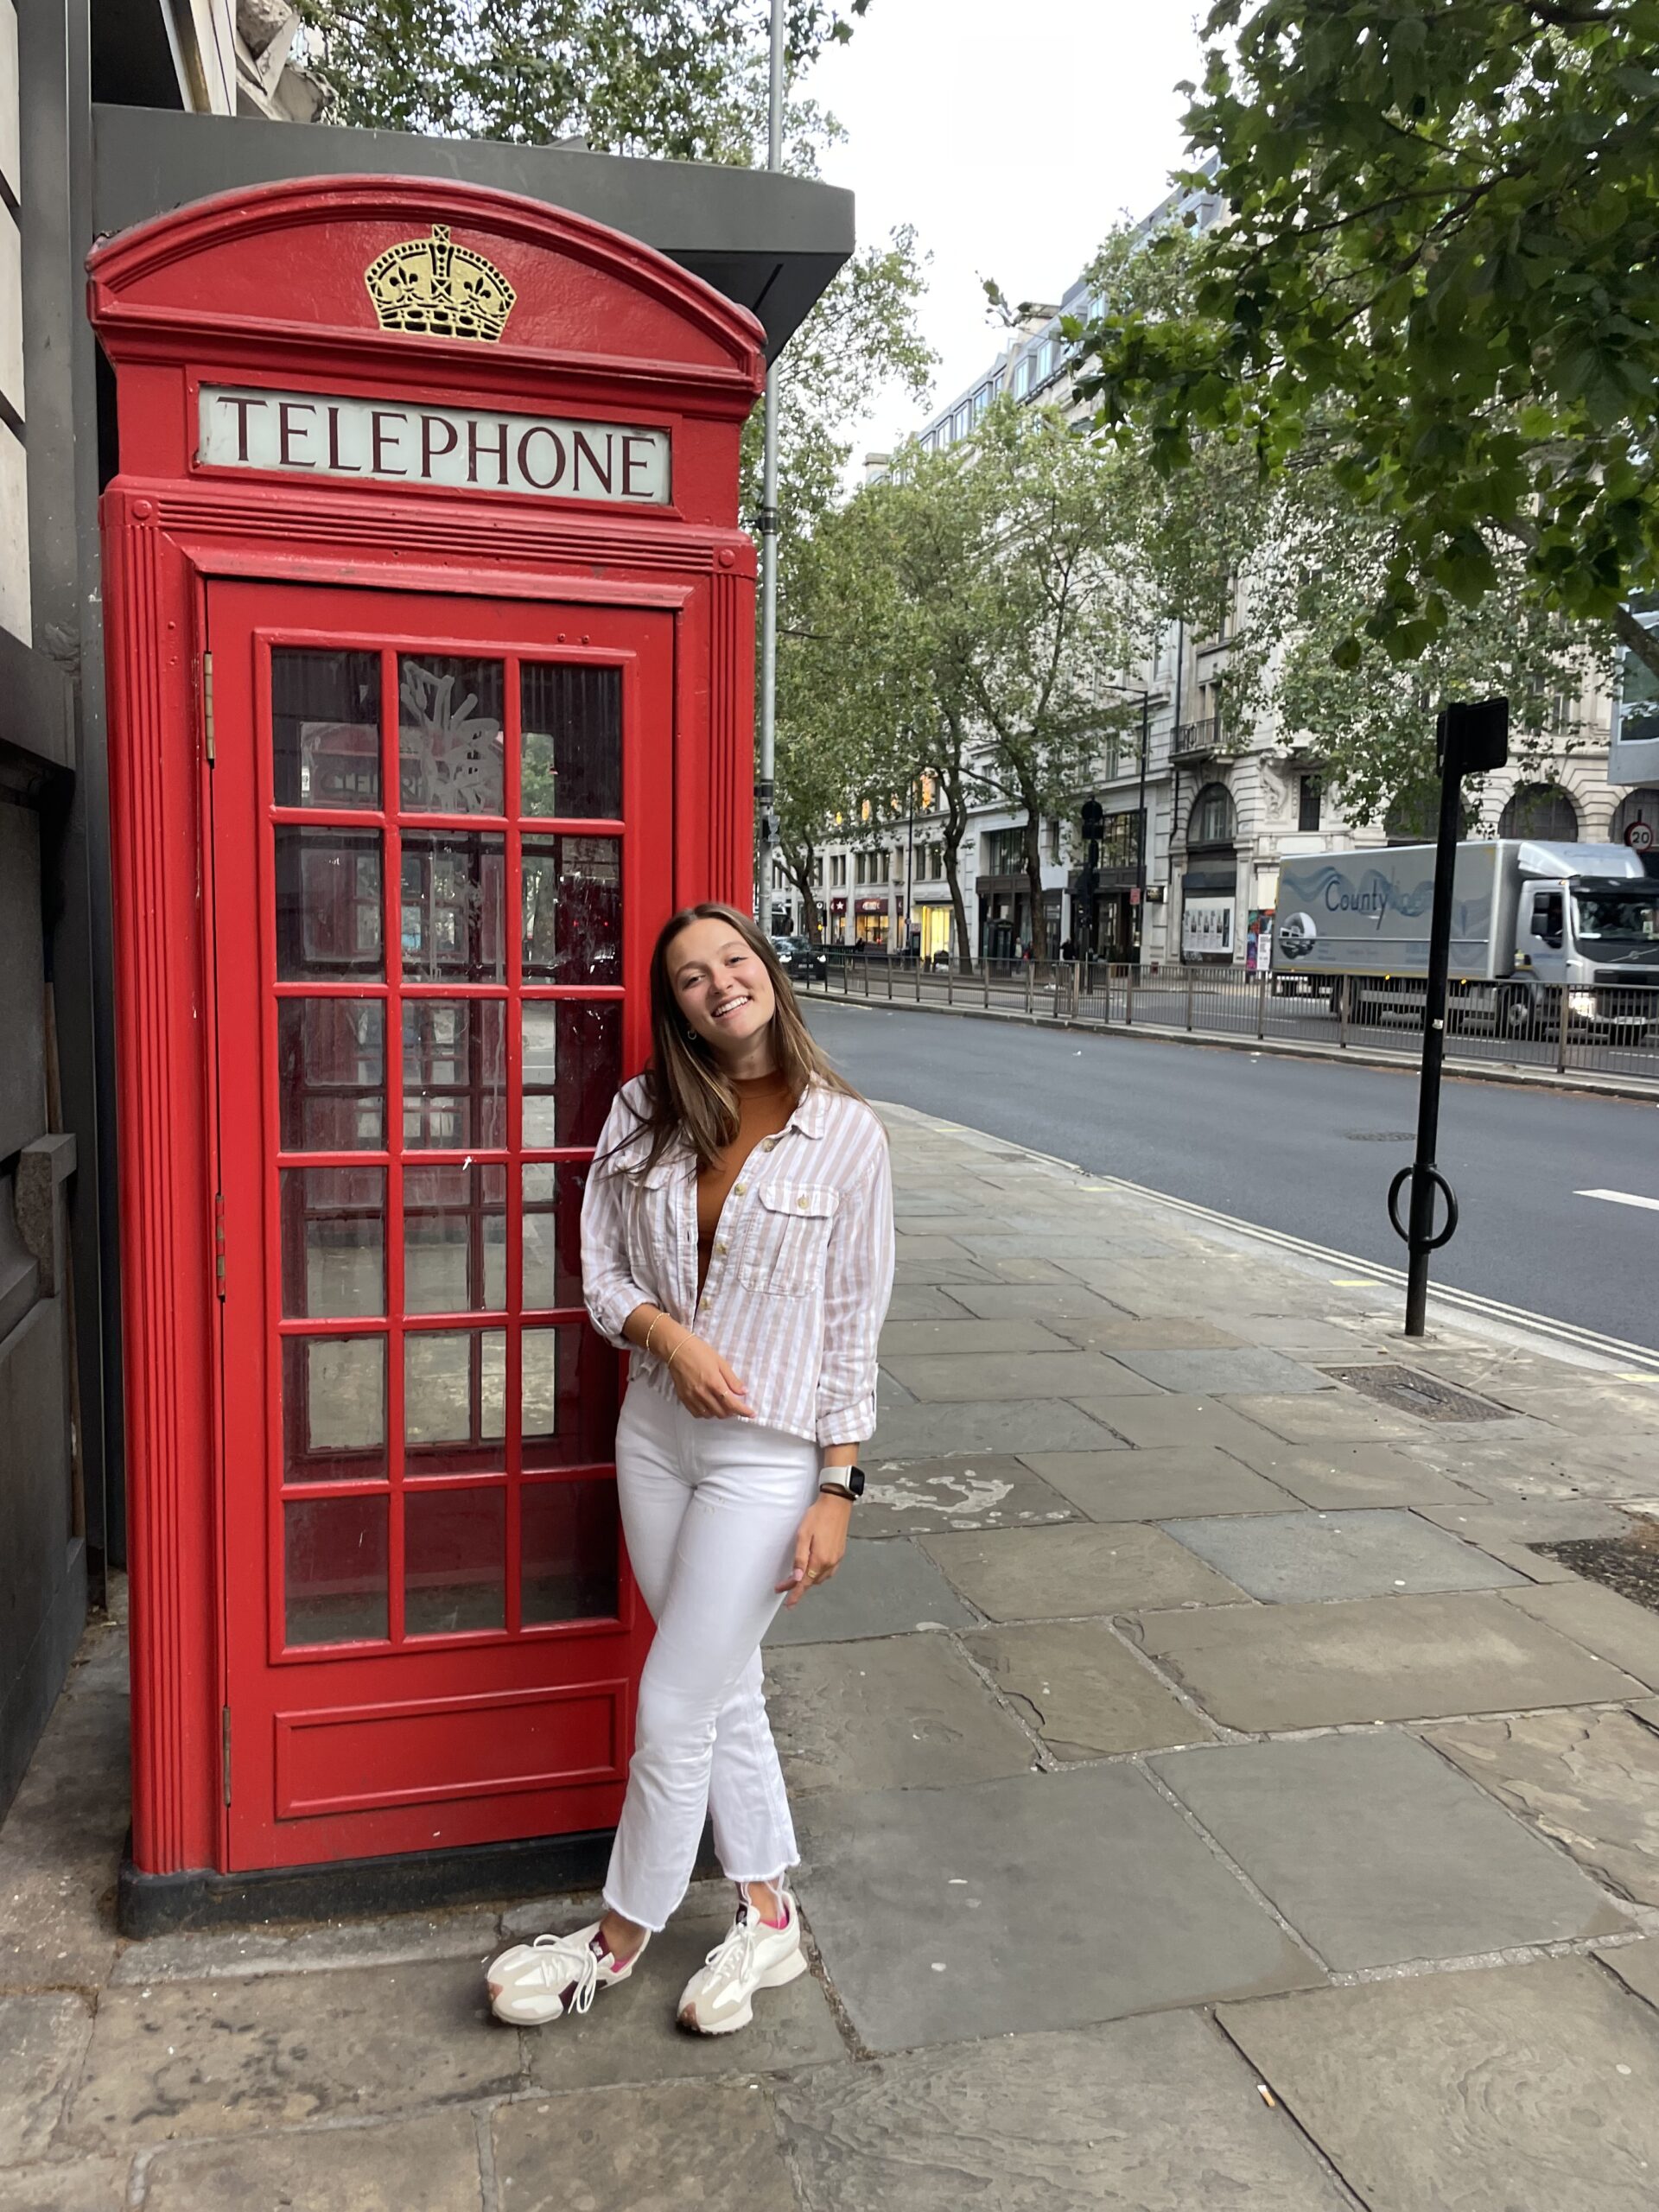 Photo of me in front a telephone booth in London